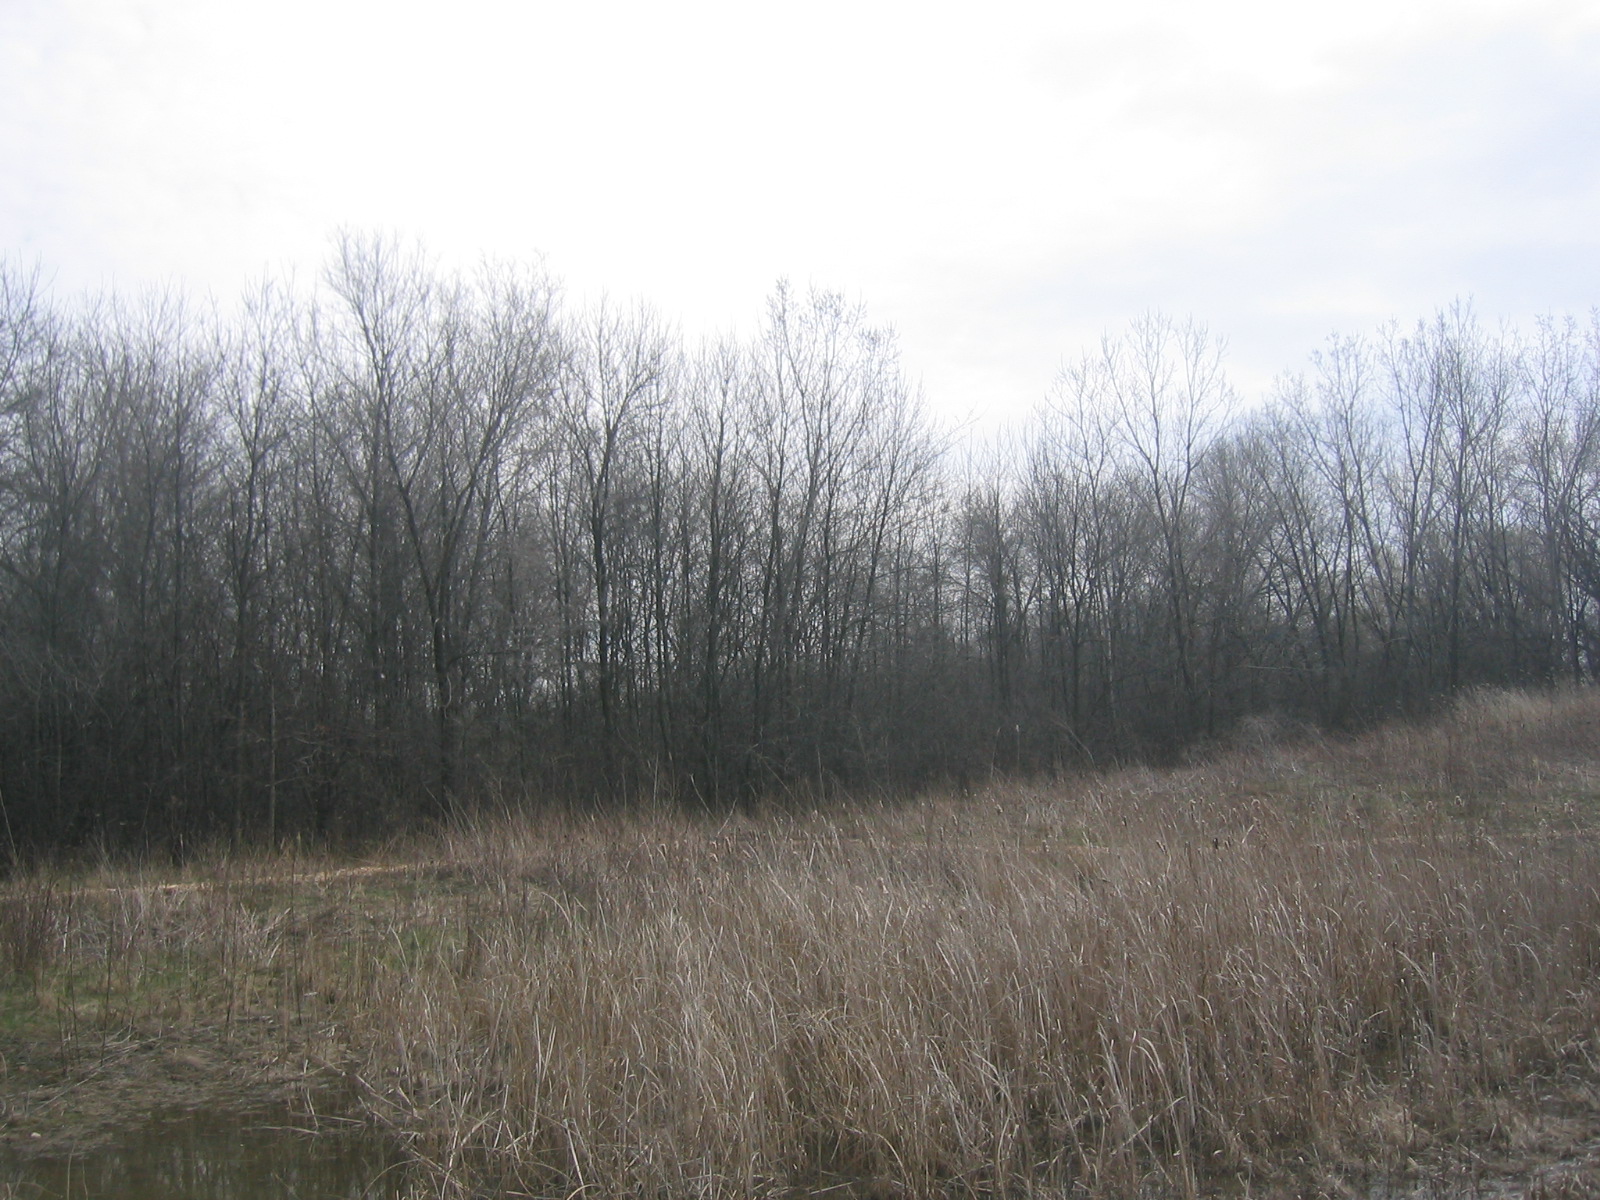 large trees with no leaves are standing in a field